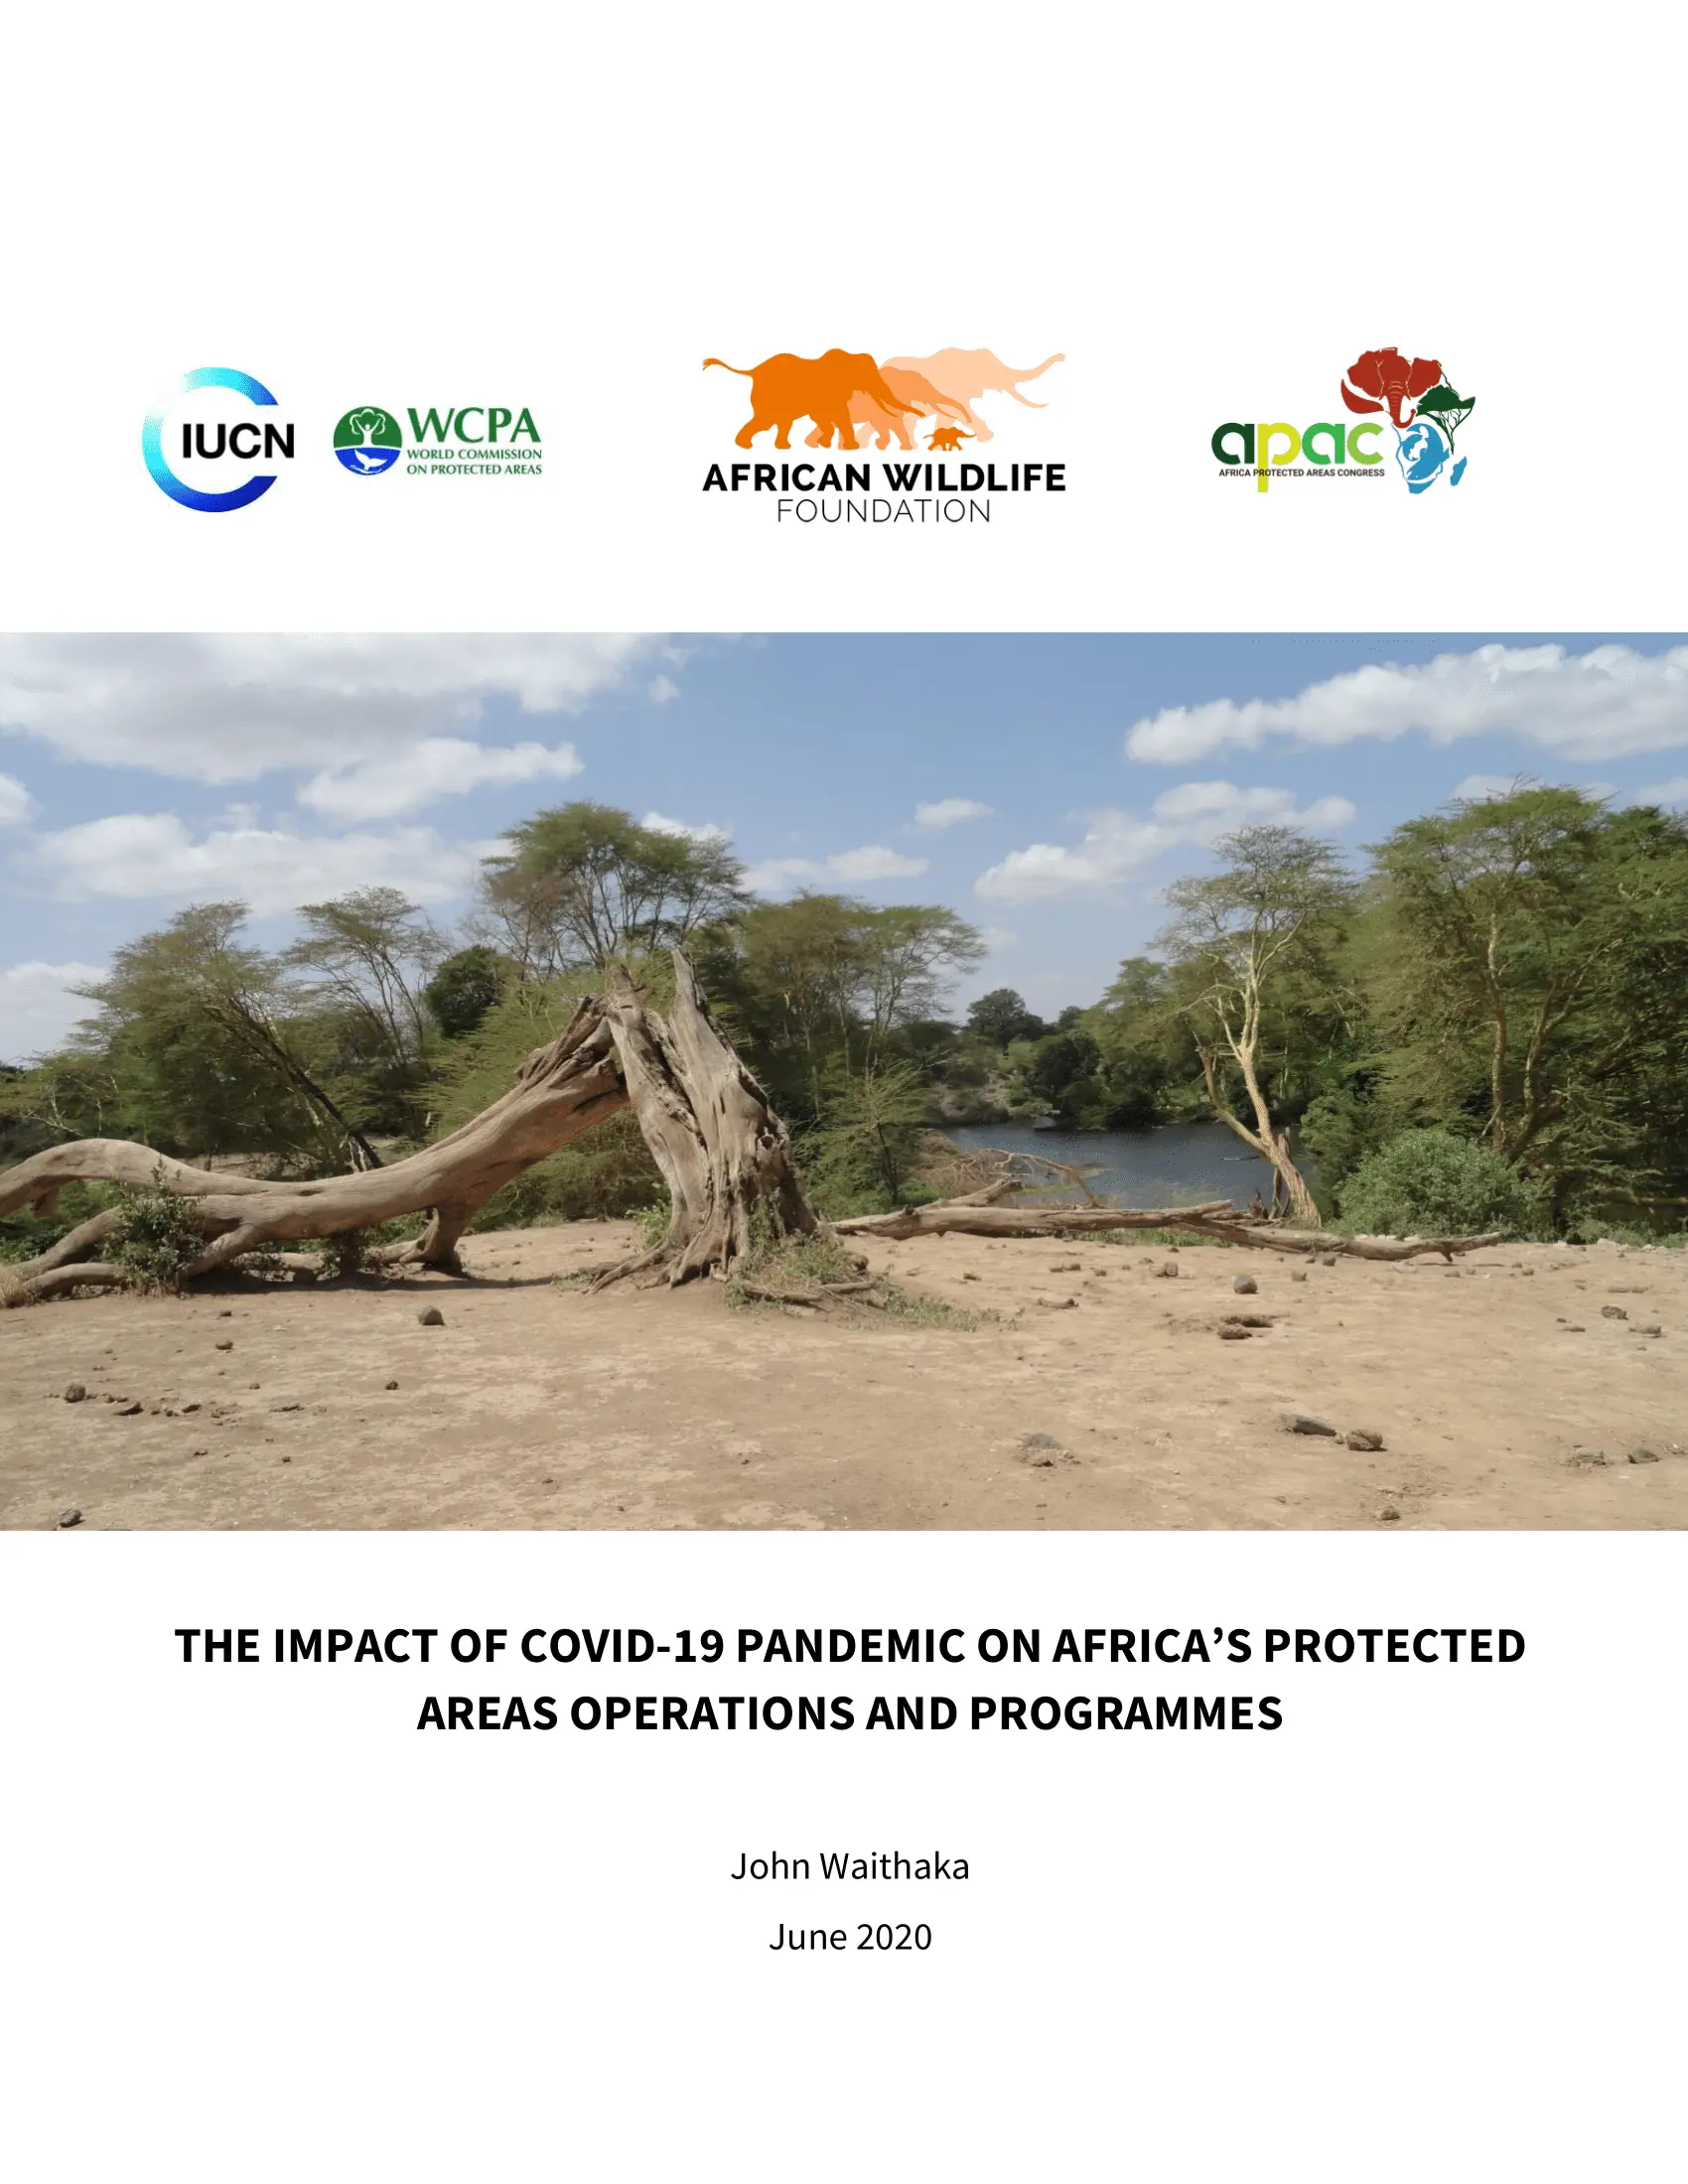 The Impact of COVID-19 Pandemic on Africa’s Protected Areas Operations and Programmes